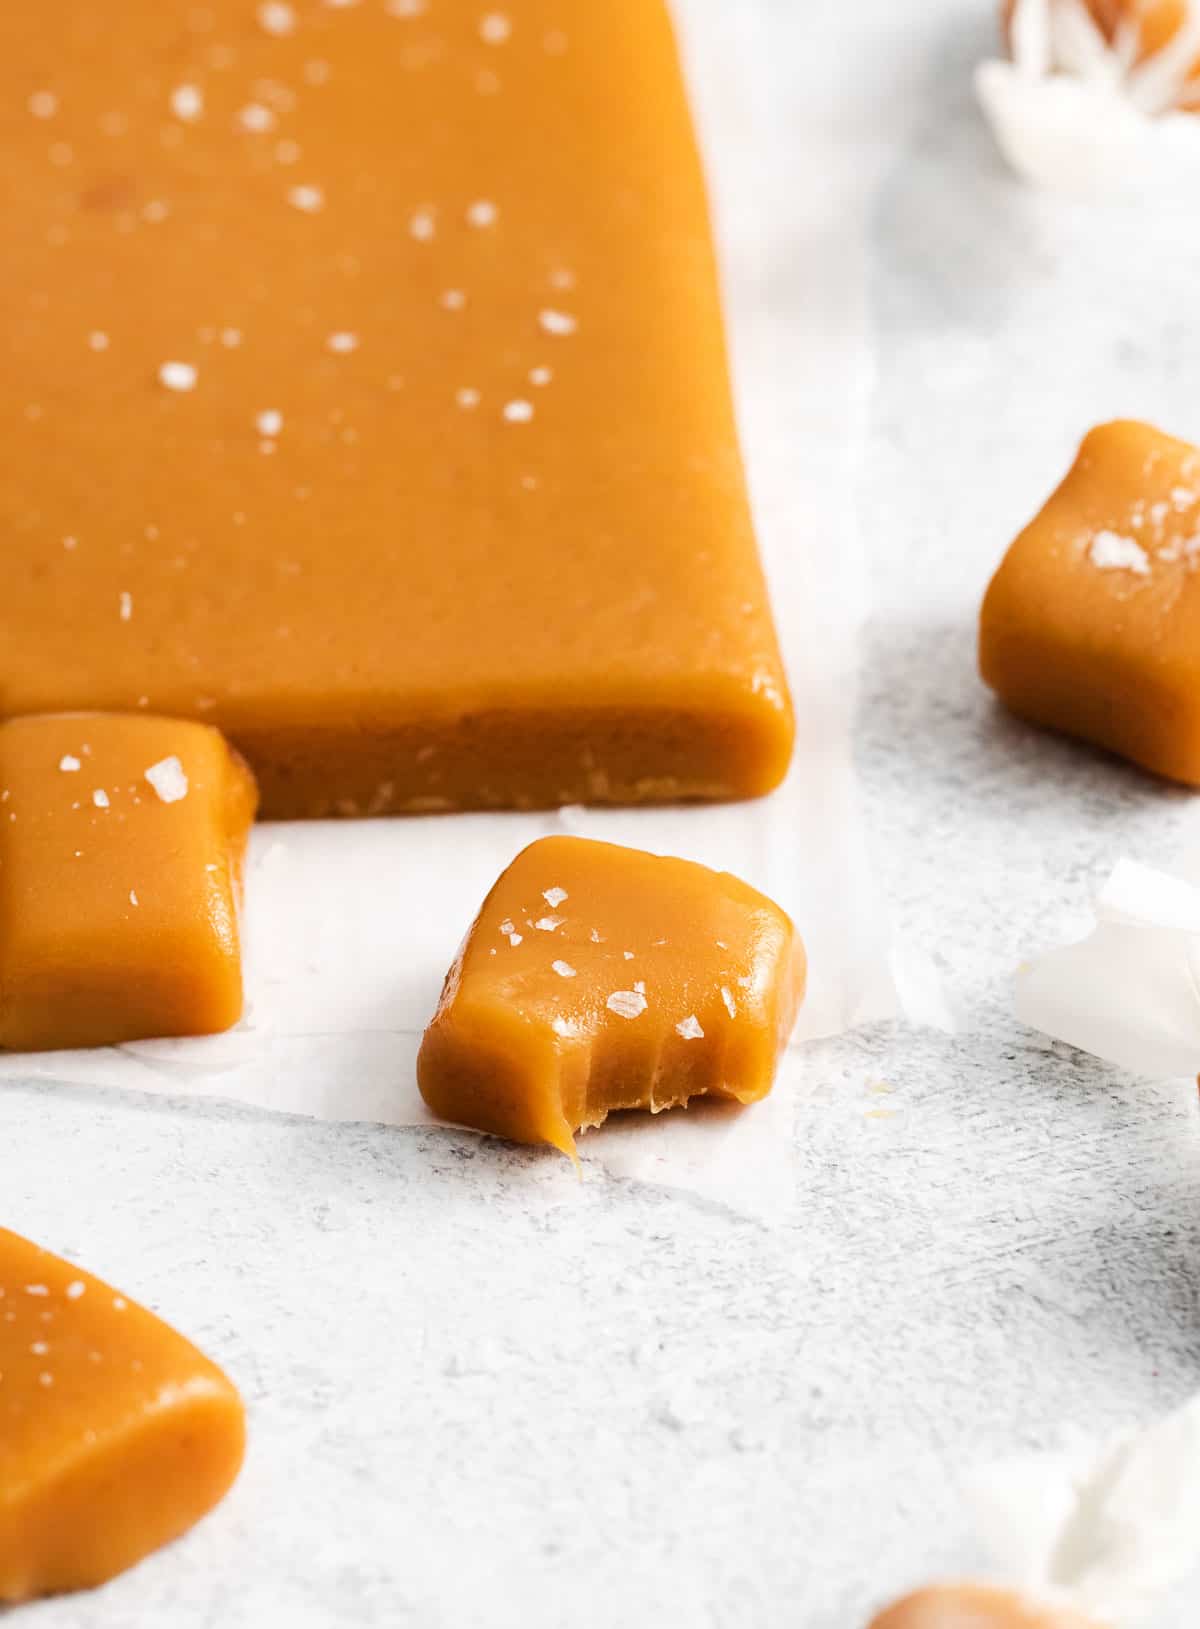 A piece of caramel with a bite taken out of it, and more caramels in the background